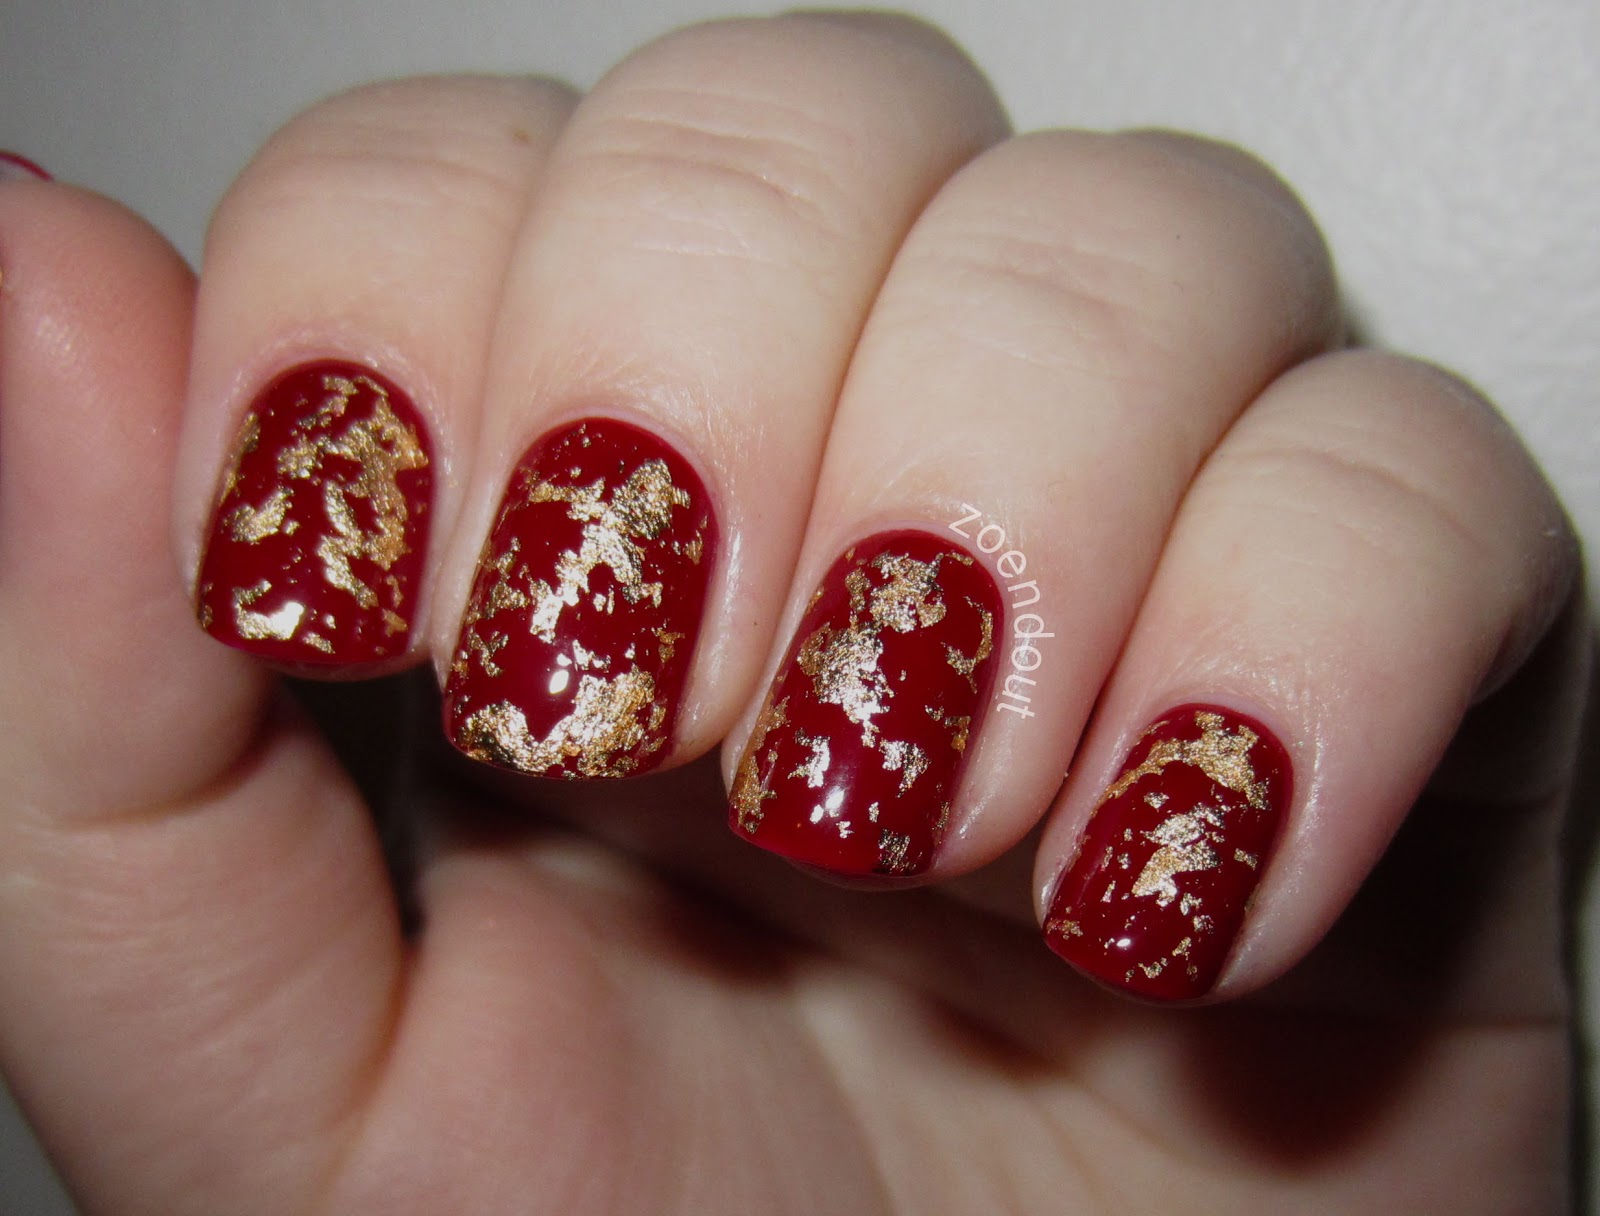 5. "Sparkling Christmas Manicure" - wide 5